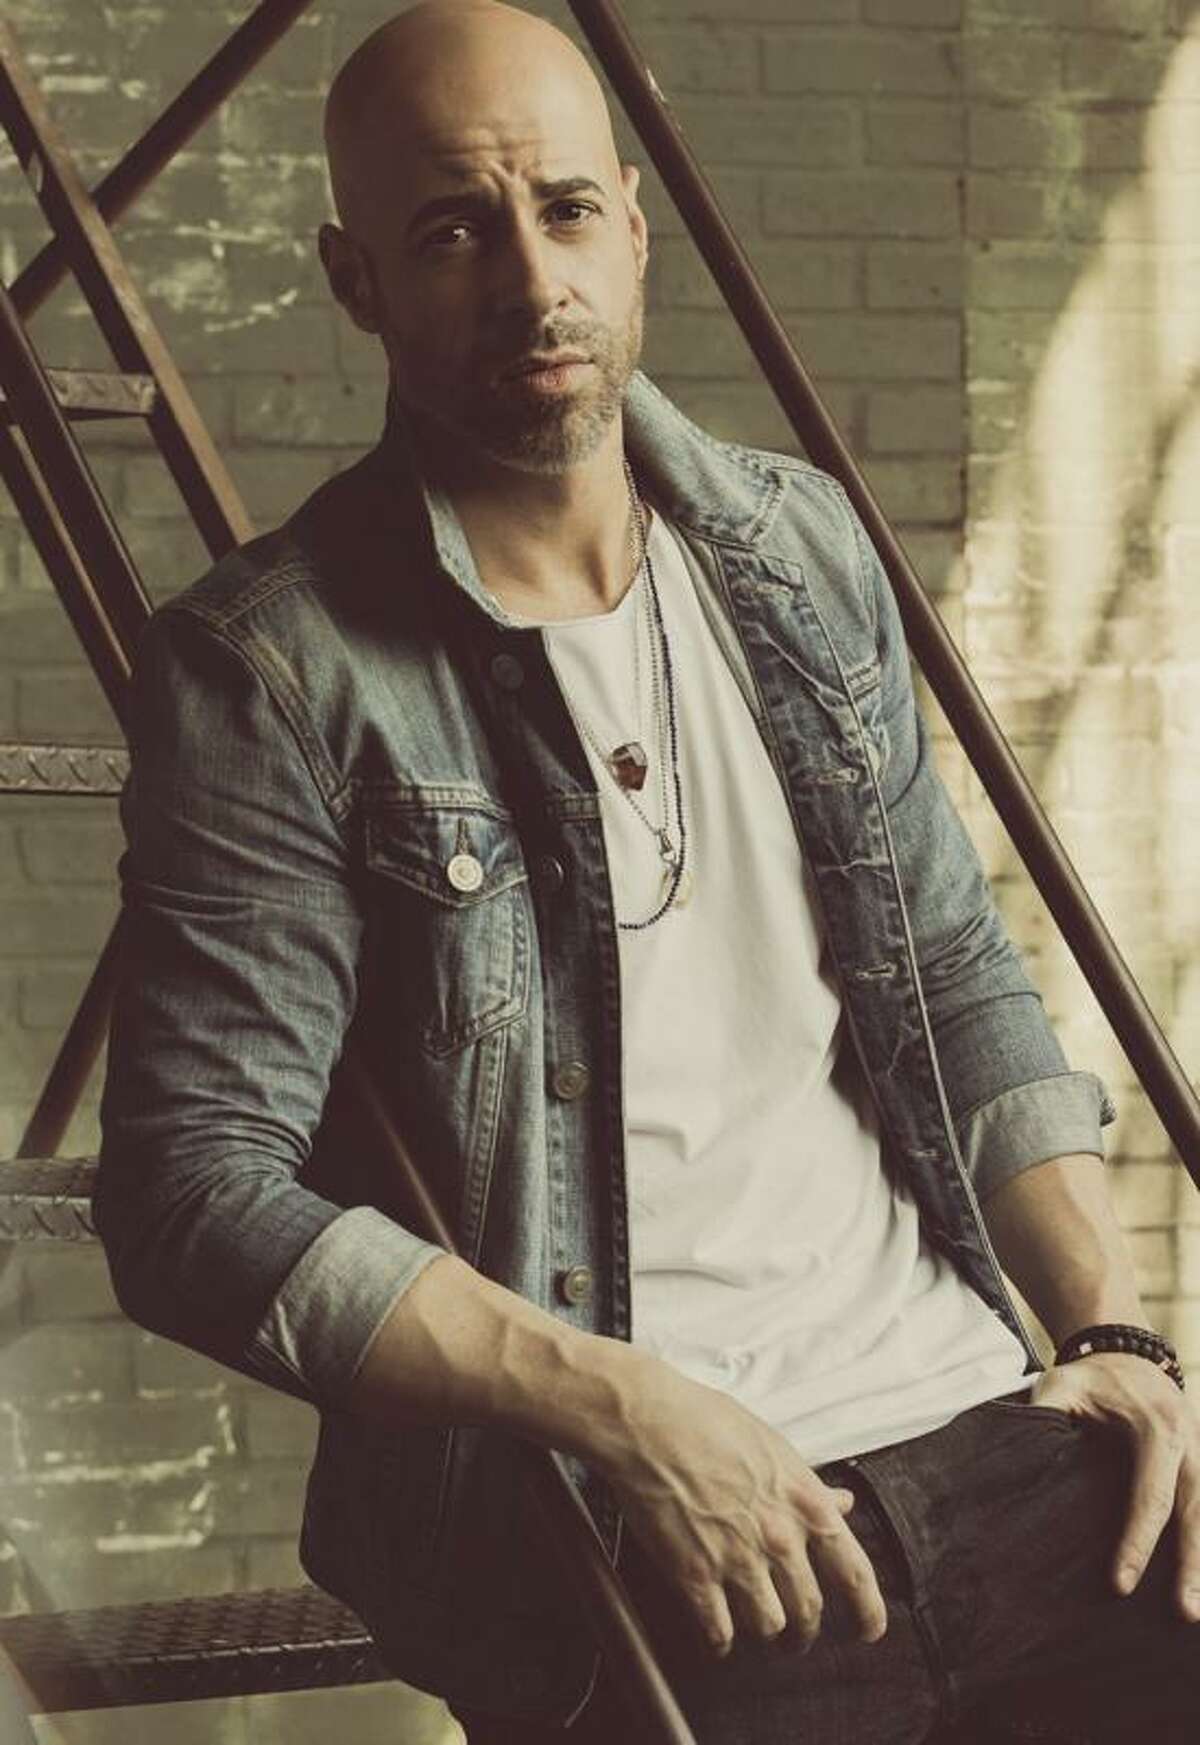 Daughtry will perform on Sept. 19 at 8 p.m. at the Ridgefield Playhouse, 80 East Ridge Road, Ridgefield. Tickets are $130. For more information, visit ridgefieldplayhouse.org.